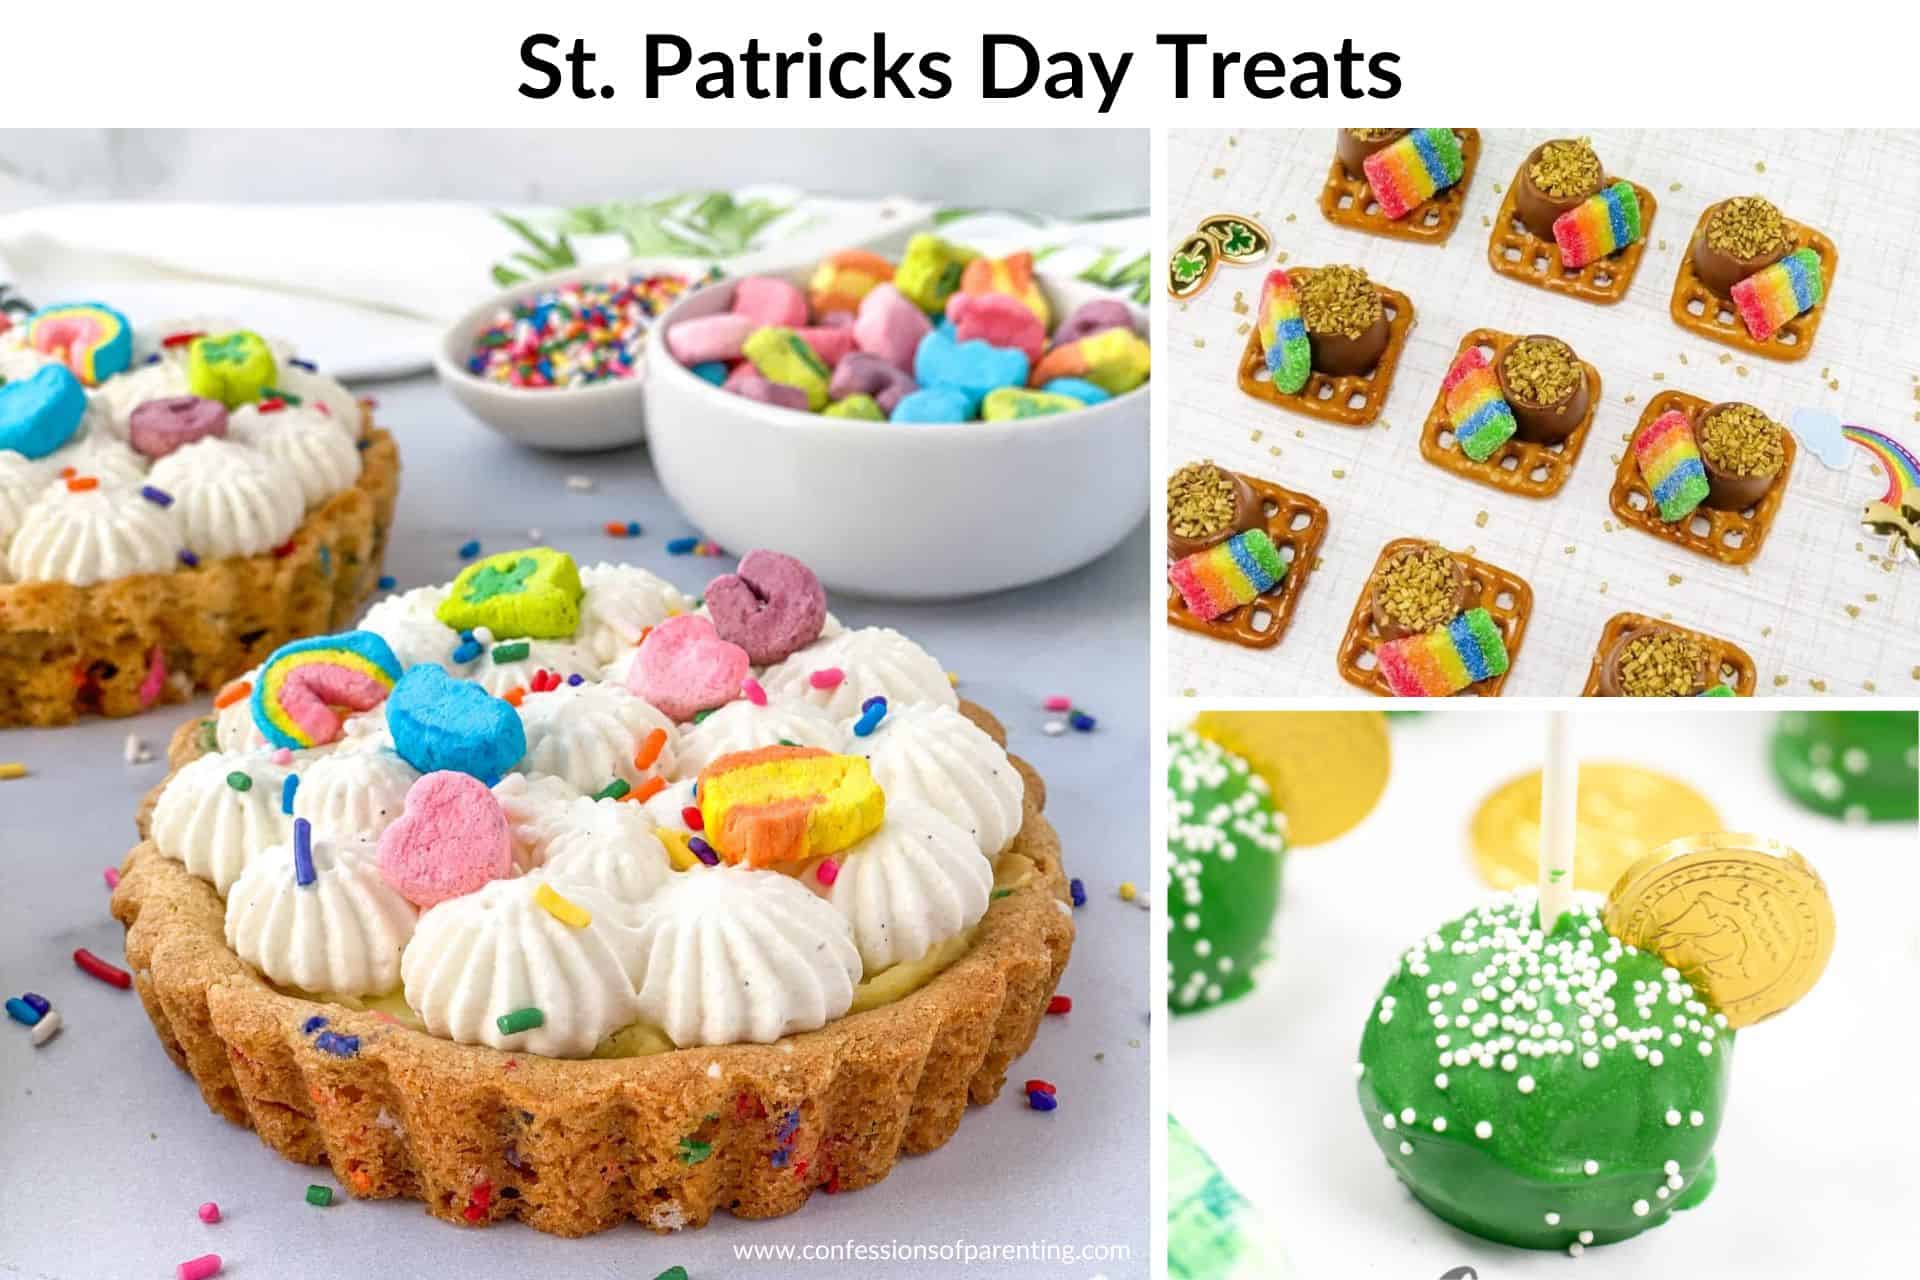 36 Delicious St. Patrick’s Day Treats You’ll Love